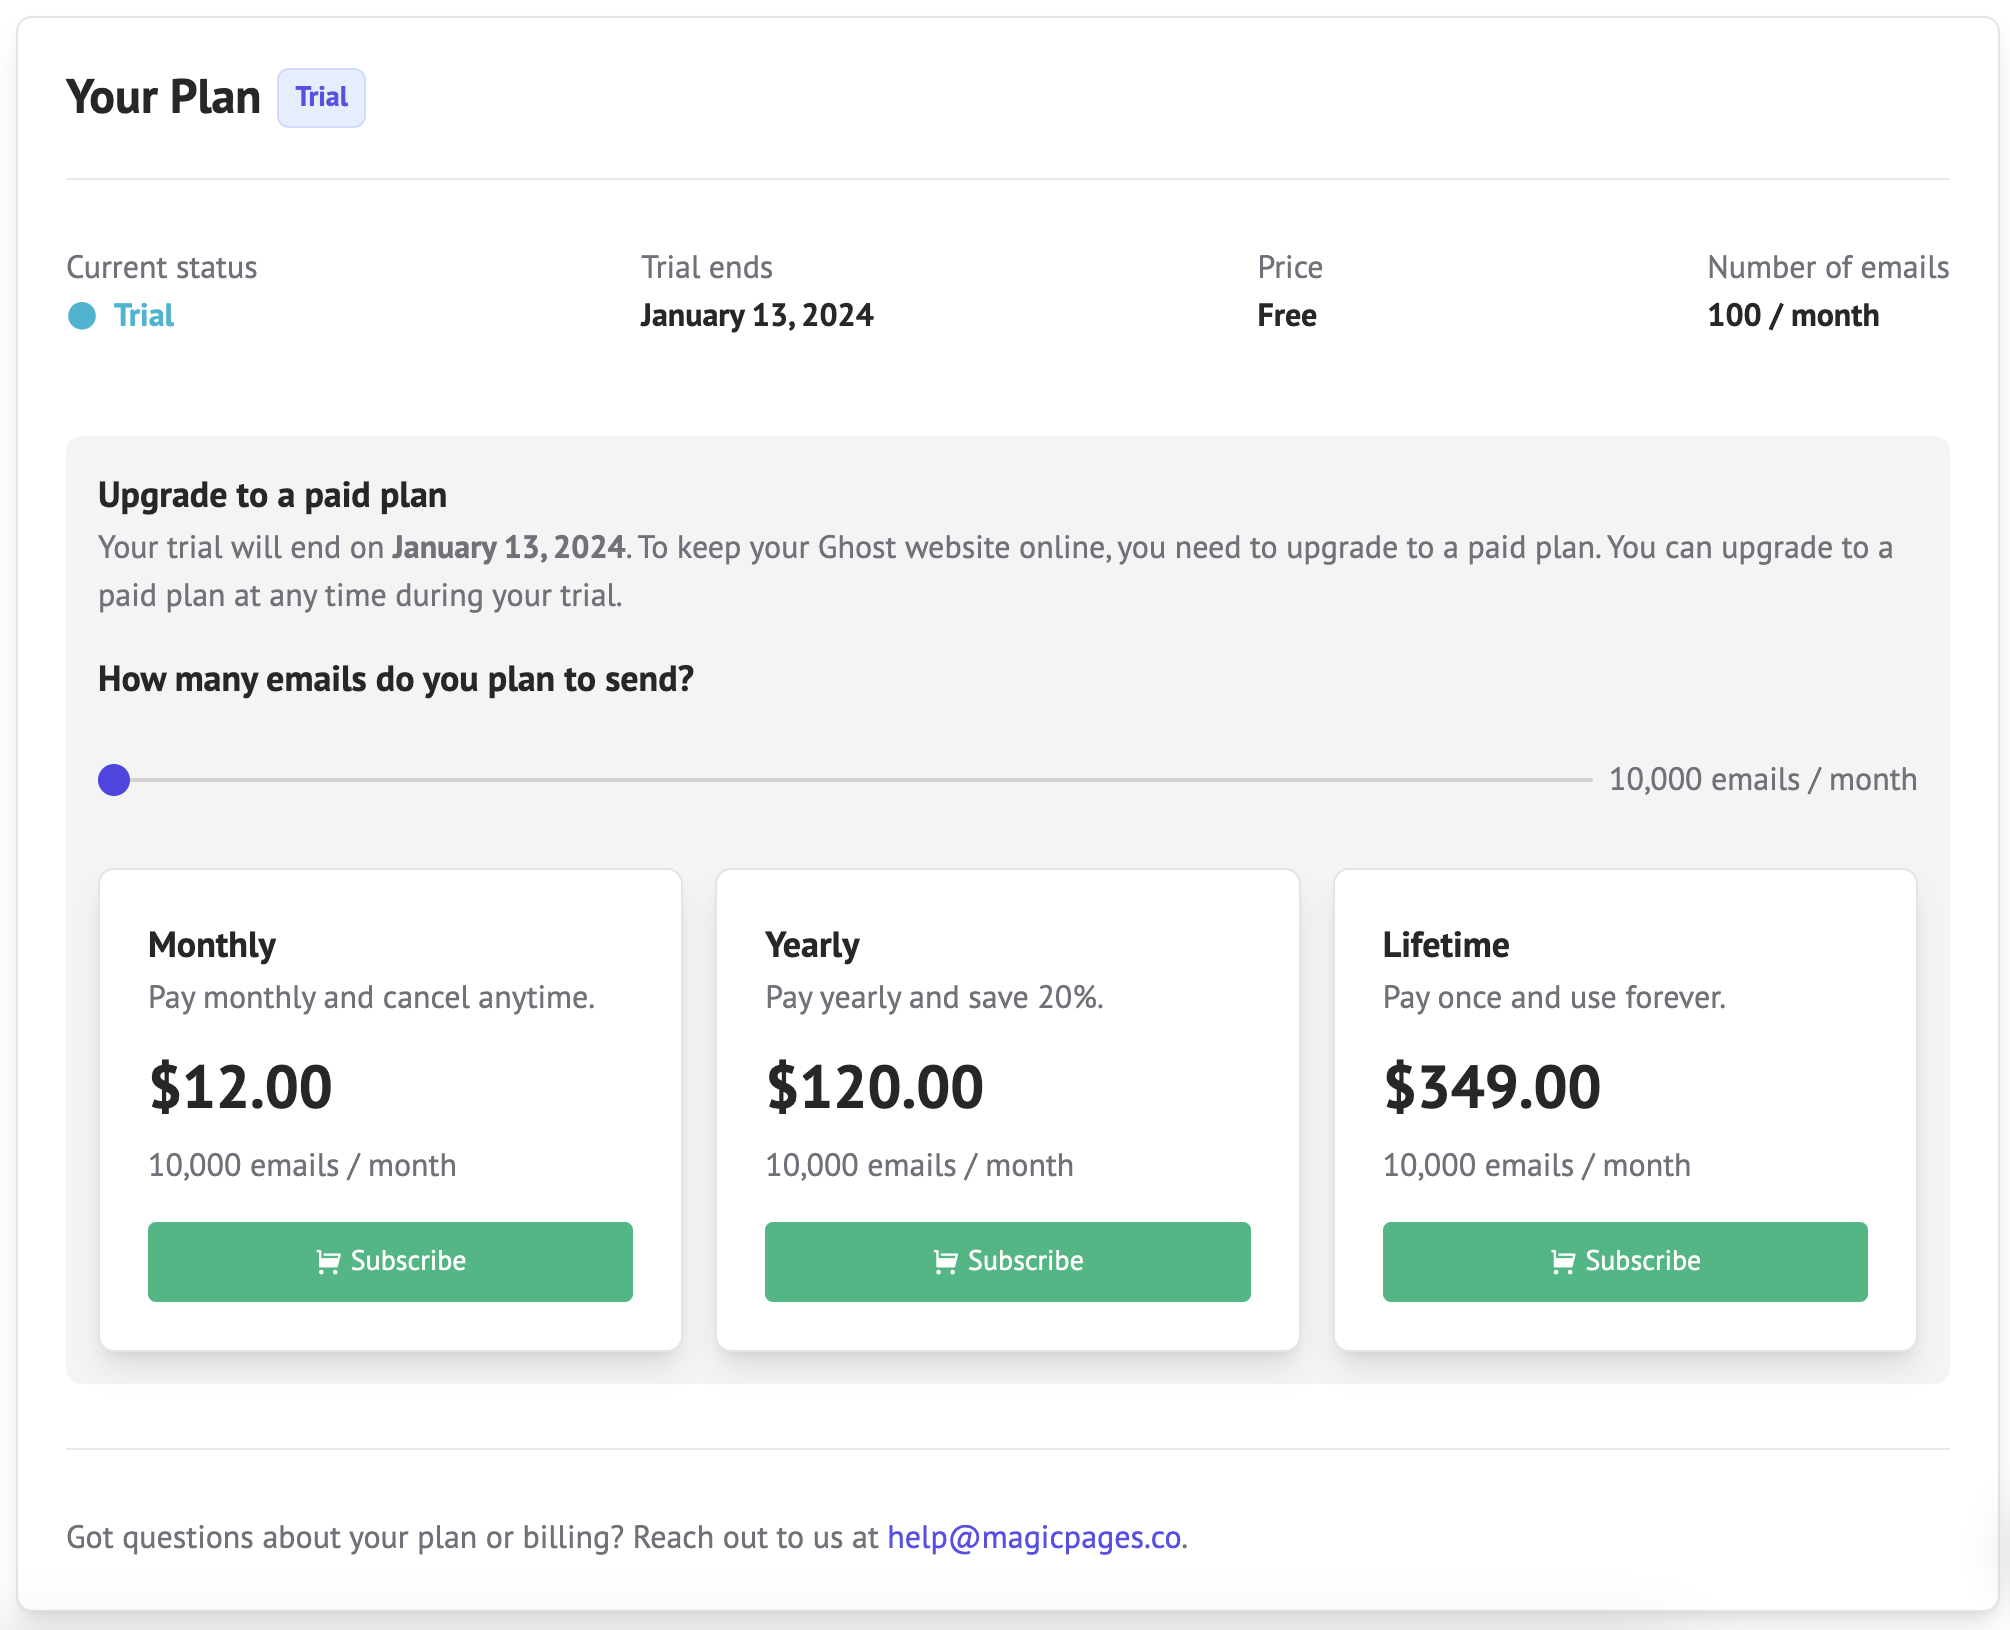 A screenshot of three pricing options: 12$/month, 120$/year, and 349$ for a lifetime plan.